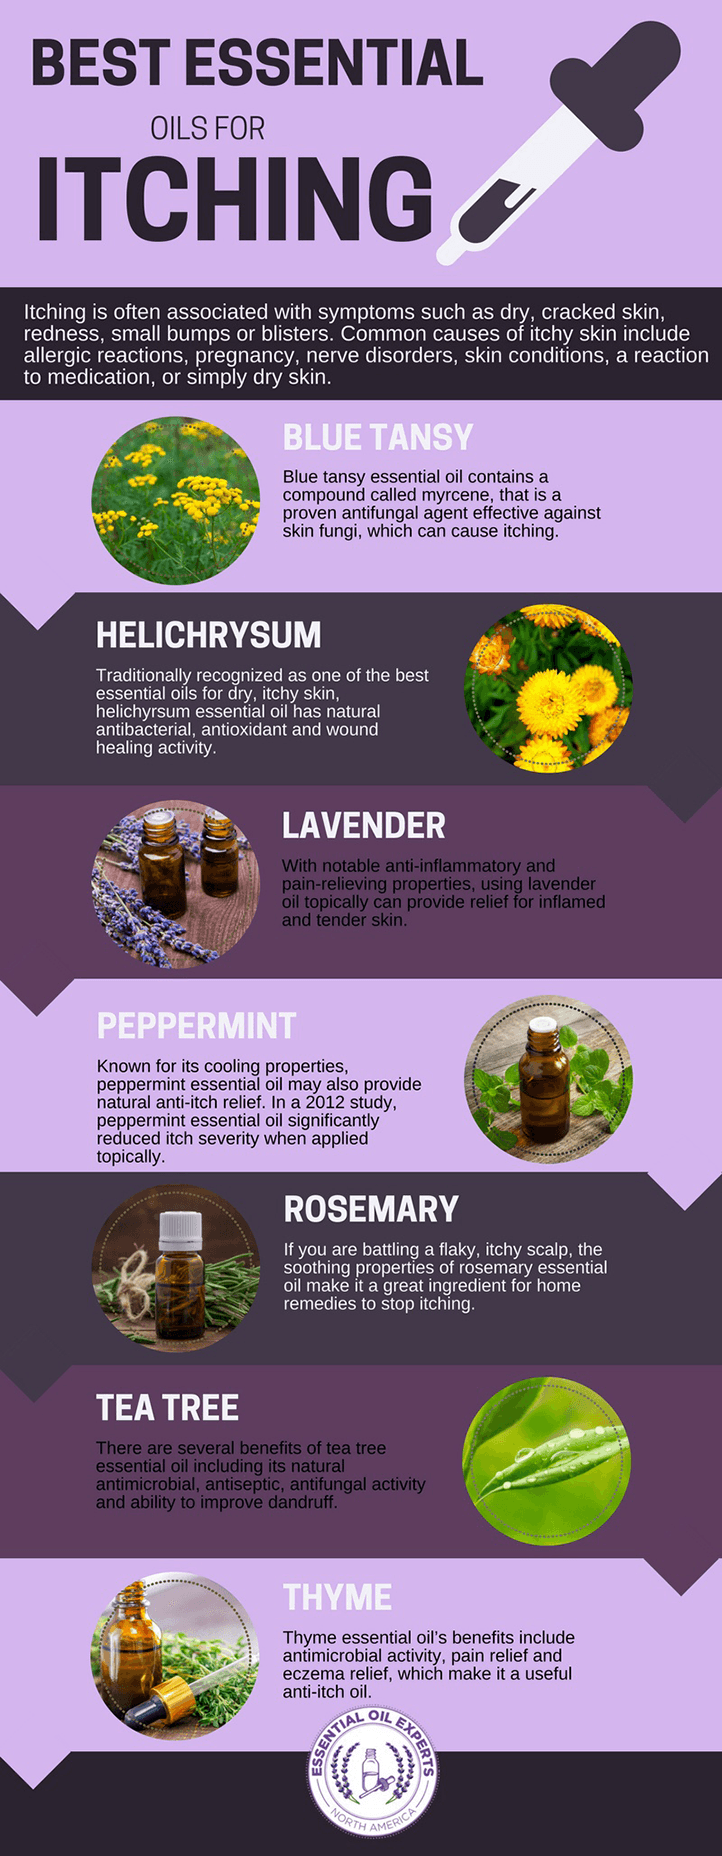 7 Best Essential Oils for Itching 